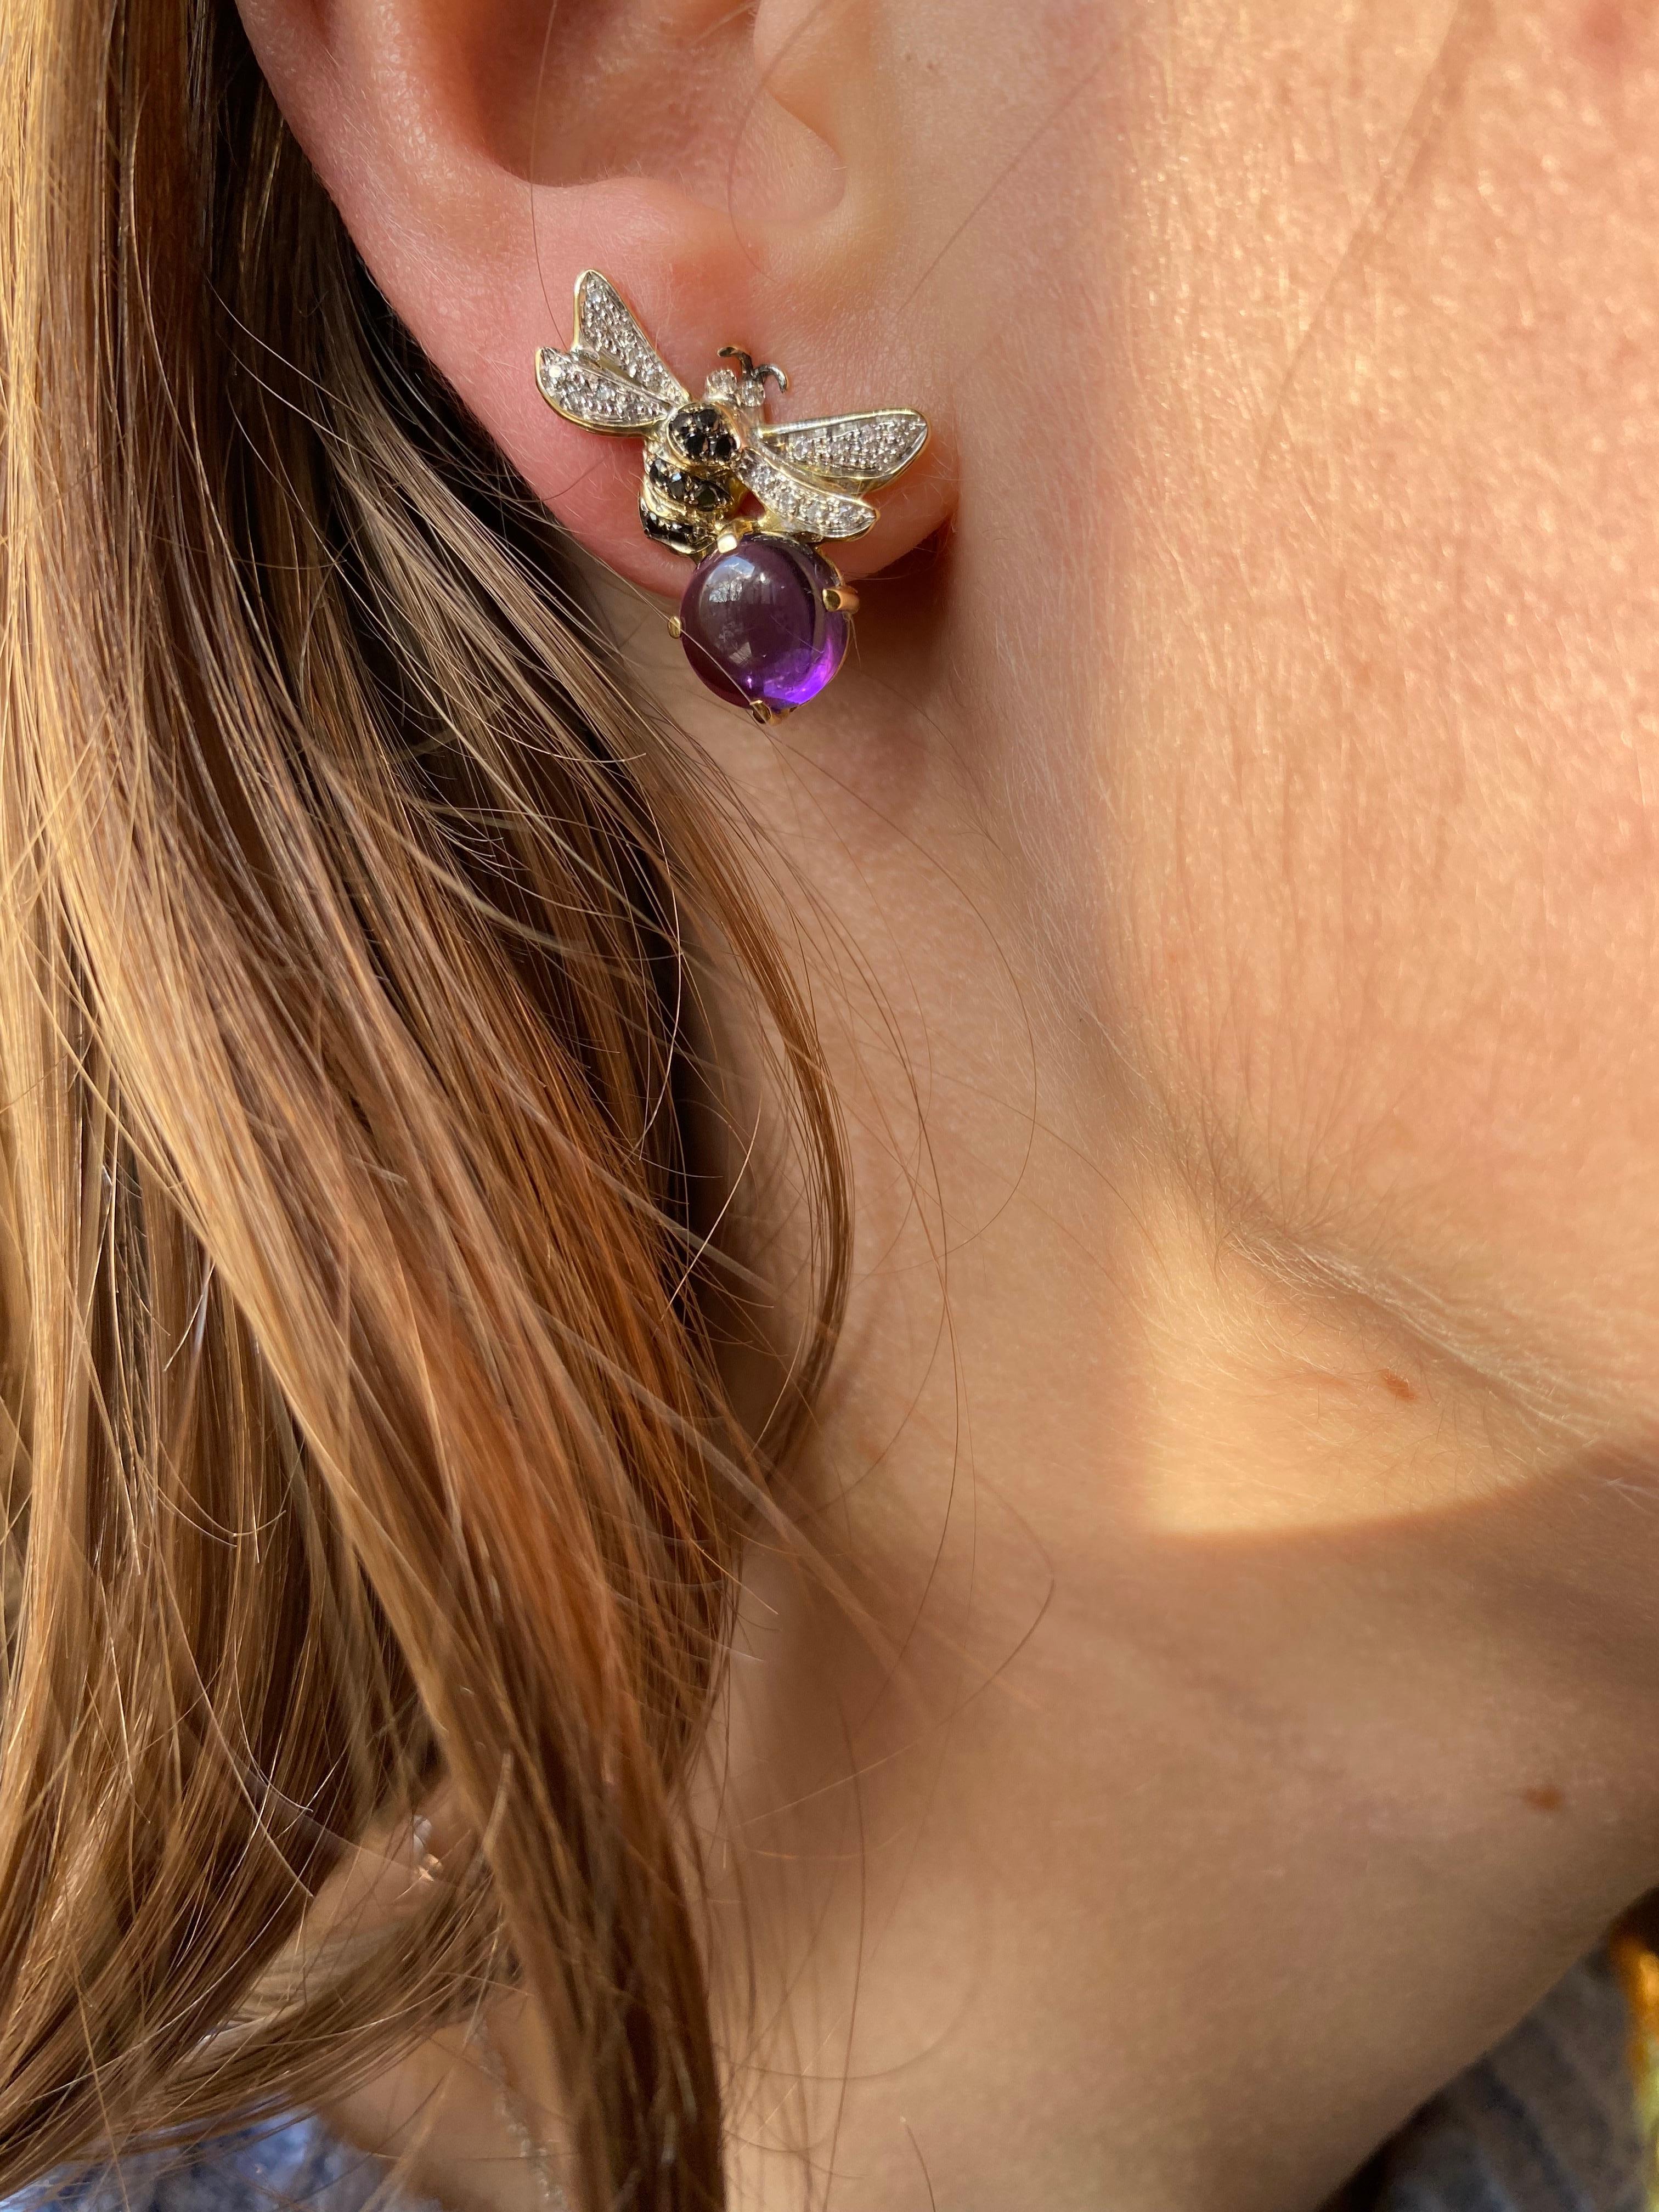 Rossella Ugolini Bees Collection, beautiful pair of Bees Stud Earrings handcrafted in 18 Karats Yellow Gold and adorned with a luminous violet Amethyst, White and black Diamonds.  
Dimensions: 0.78 in. (2 cm) x 0.78 in. (2 cm) x 0.23 in. (0.6 mm) .